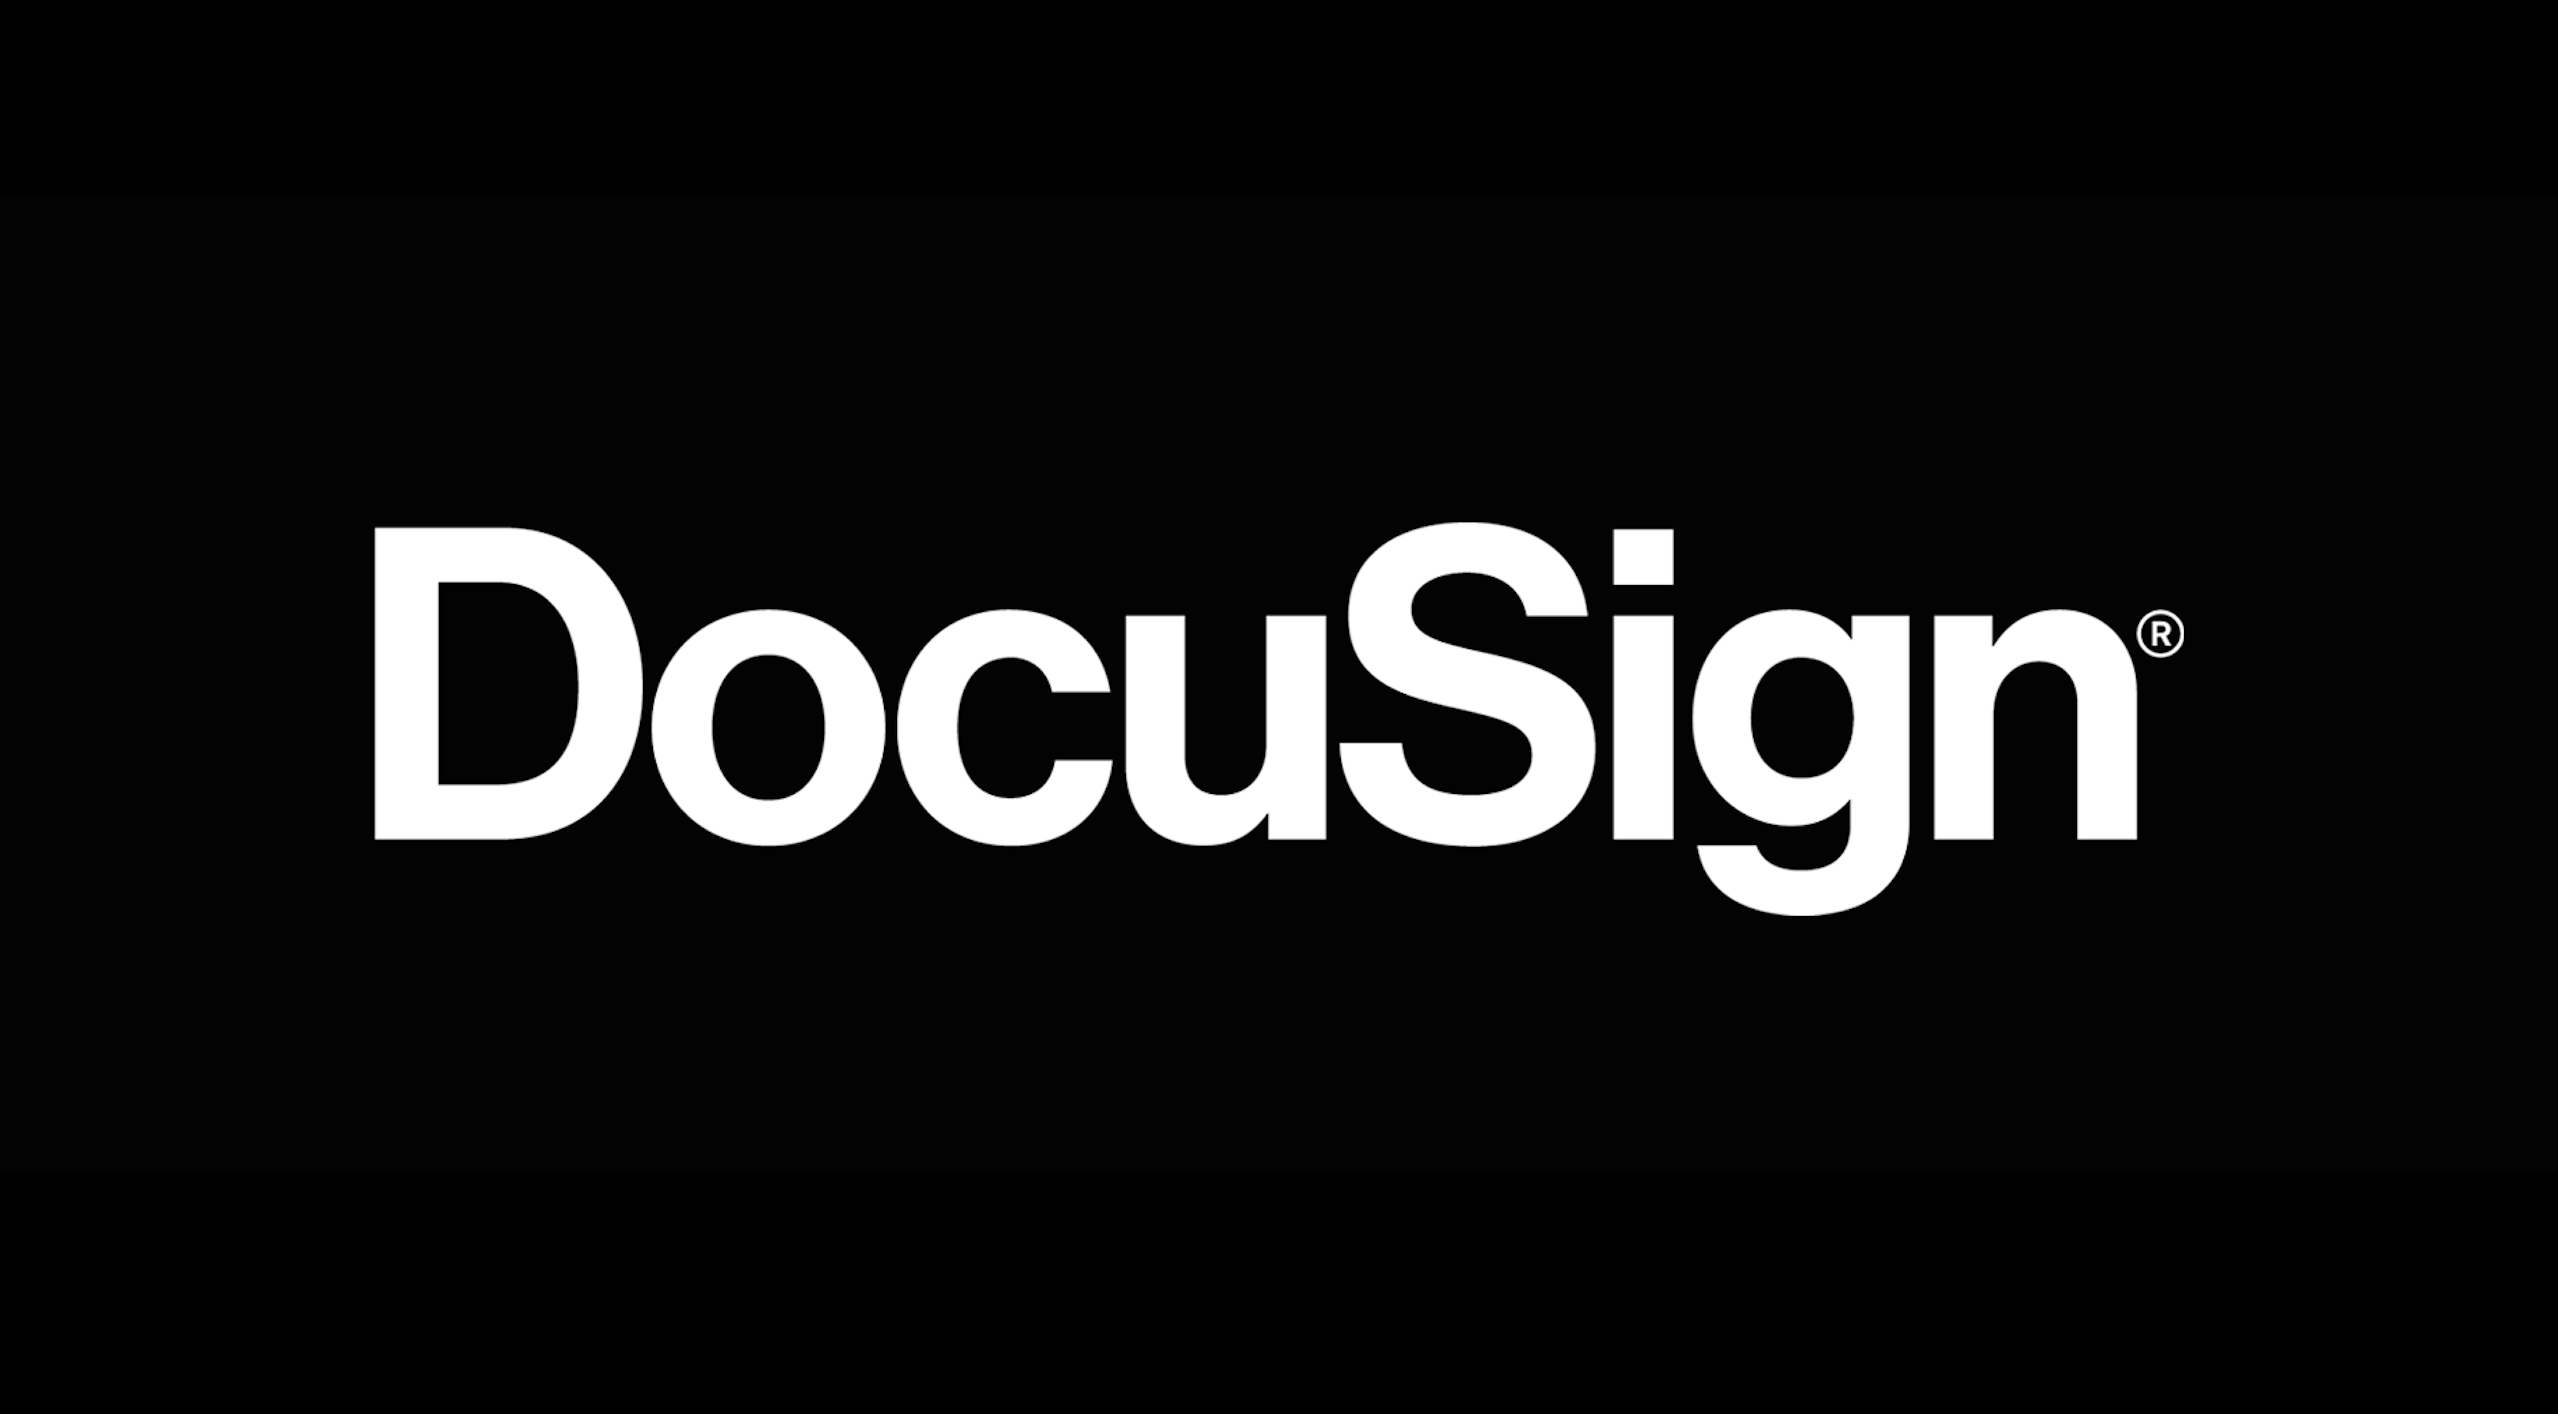 DocuSign Shares Gain On 'Better-Than-Feared' Earnings Beat: 5 Analysts Chime In